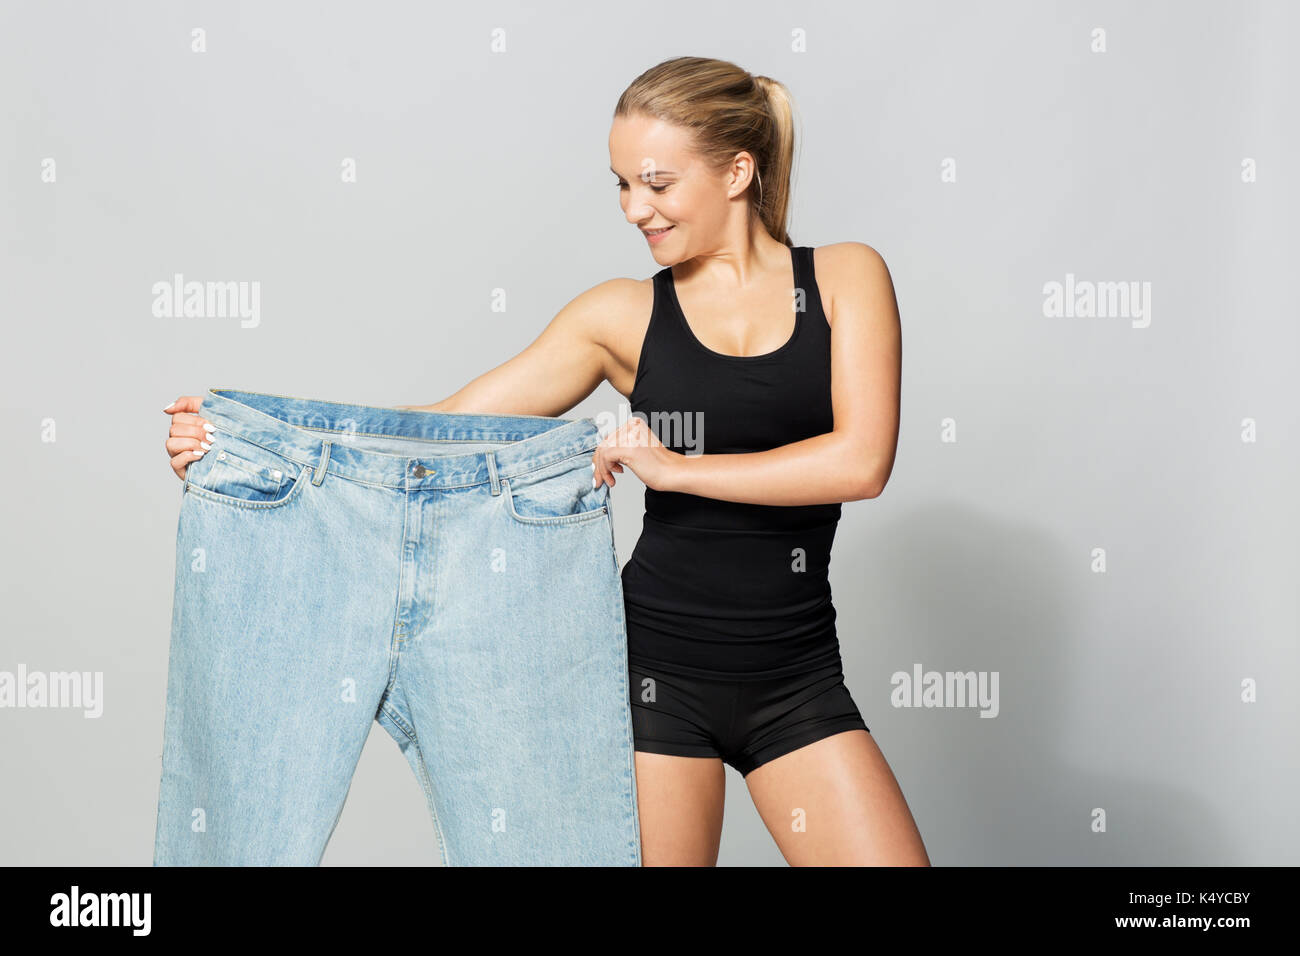 young slim sporty woman with oversize pants Stock Photo